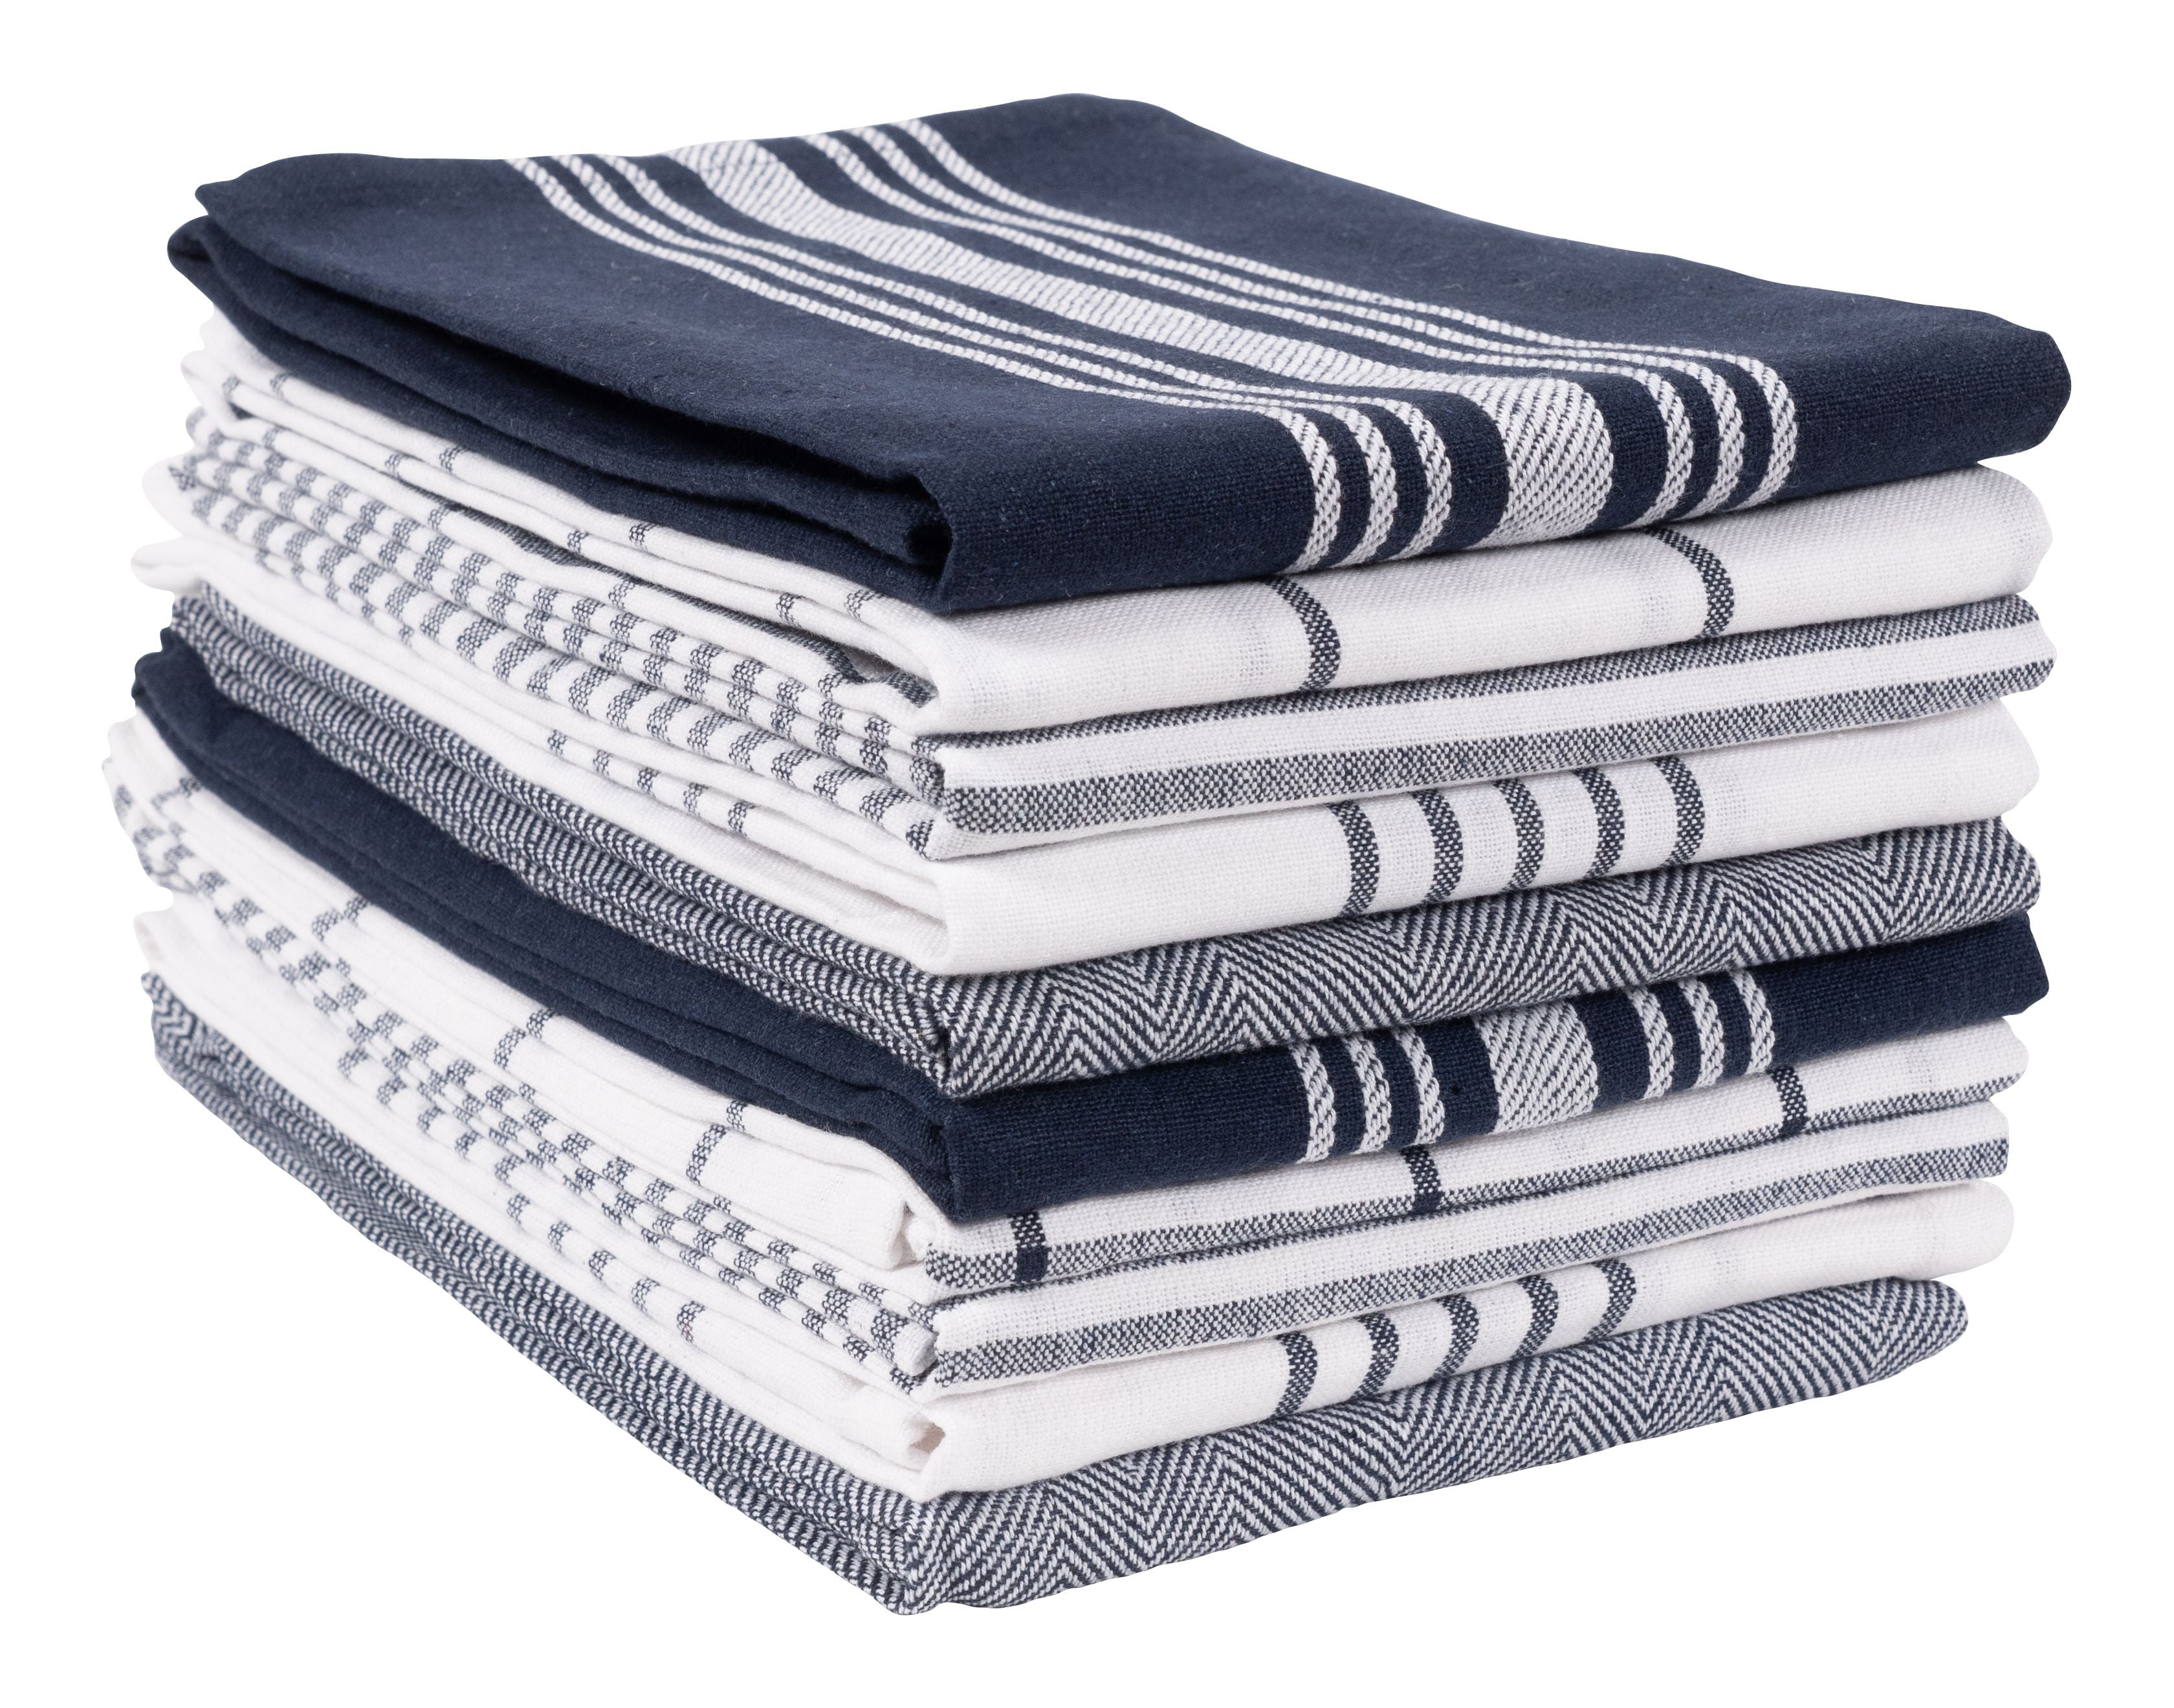 Navy Blue & White Check 100% Cotton 14" x 24" Kitchen Terry Tea Towels 10 Pack 